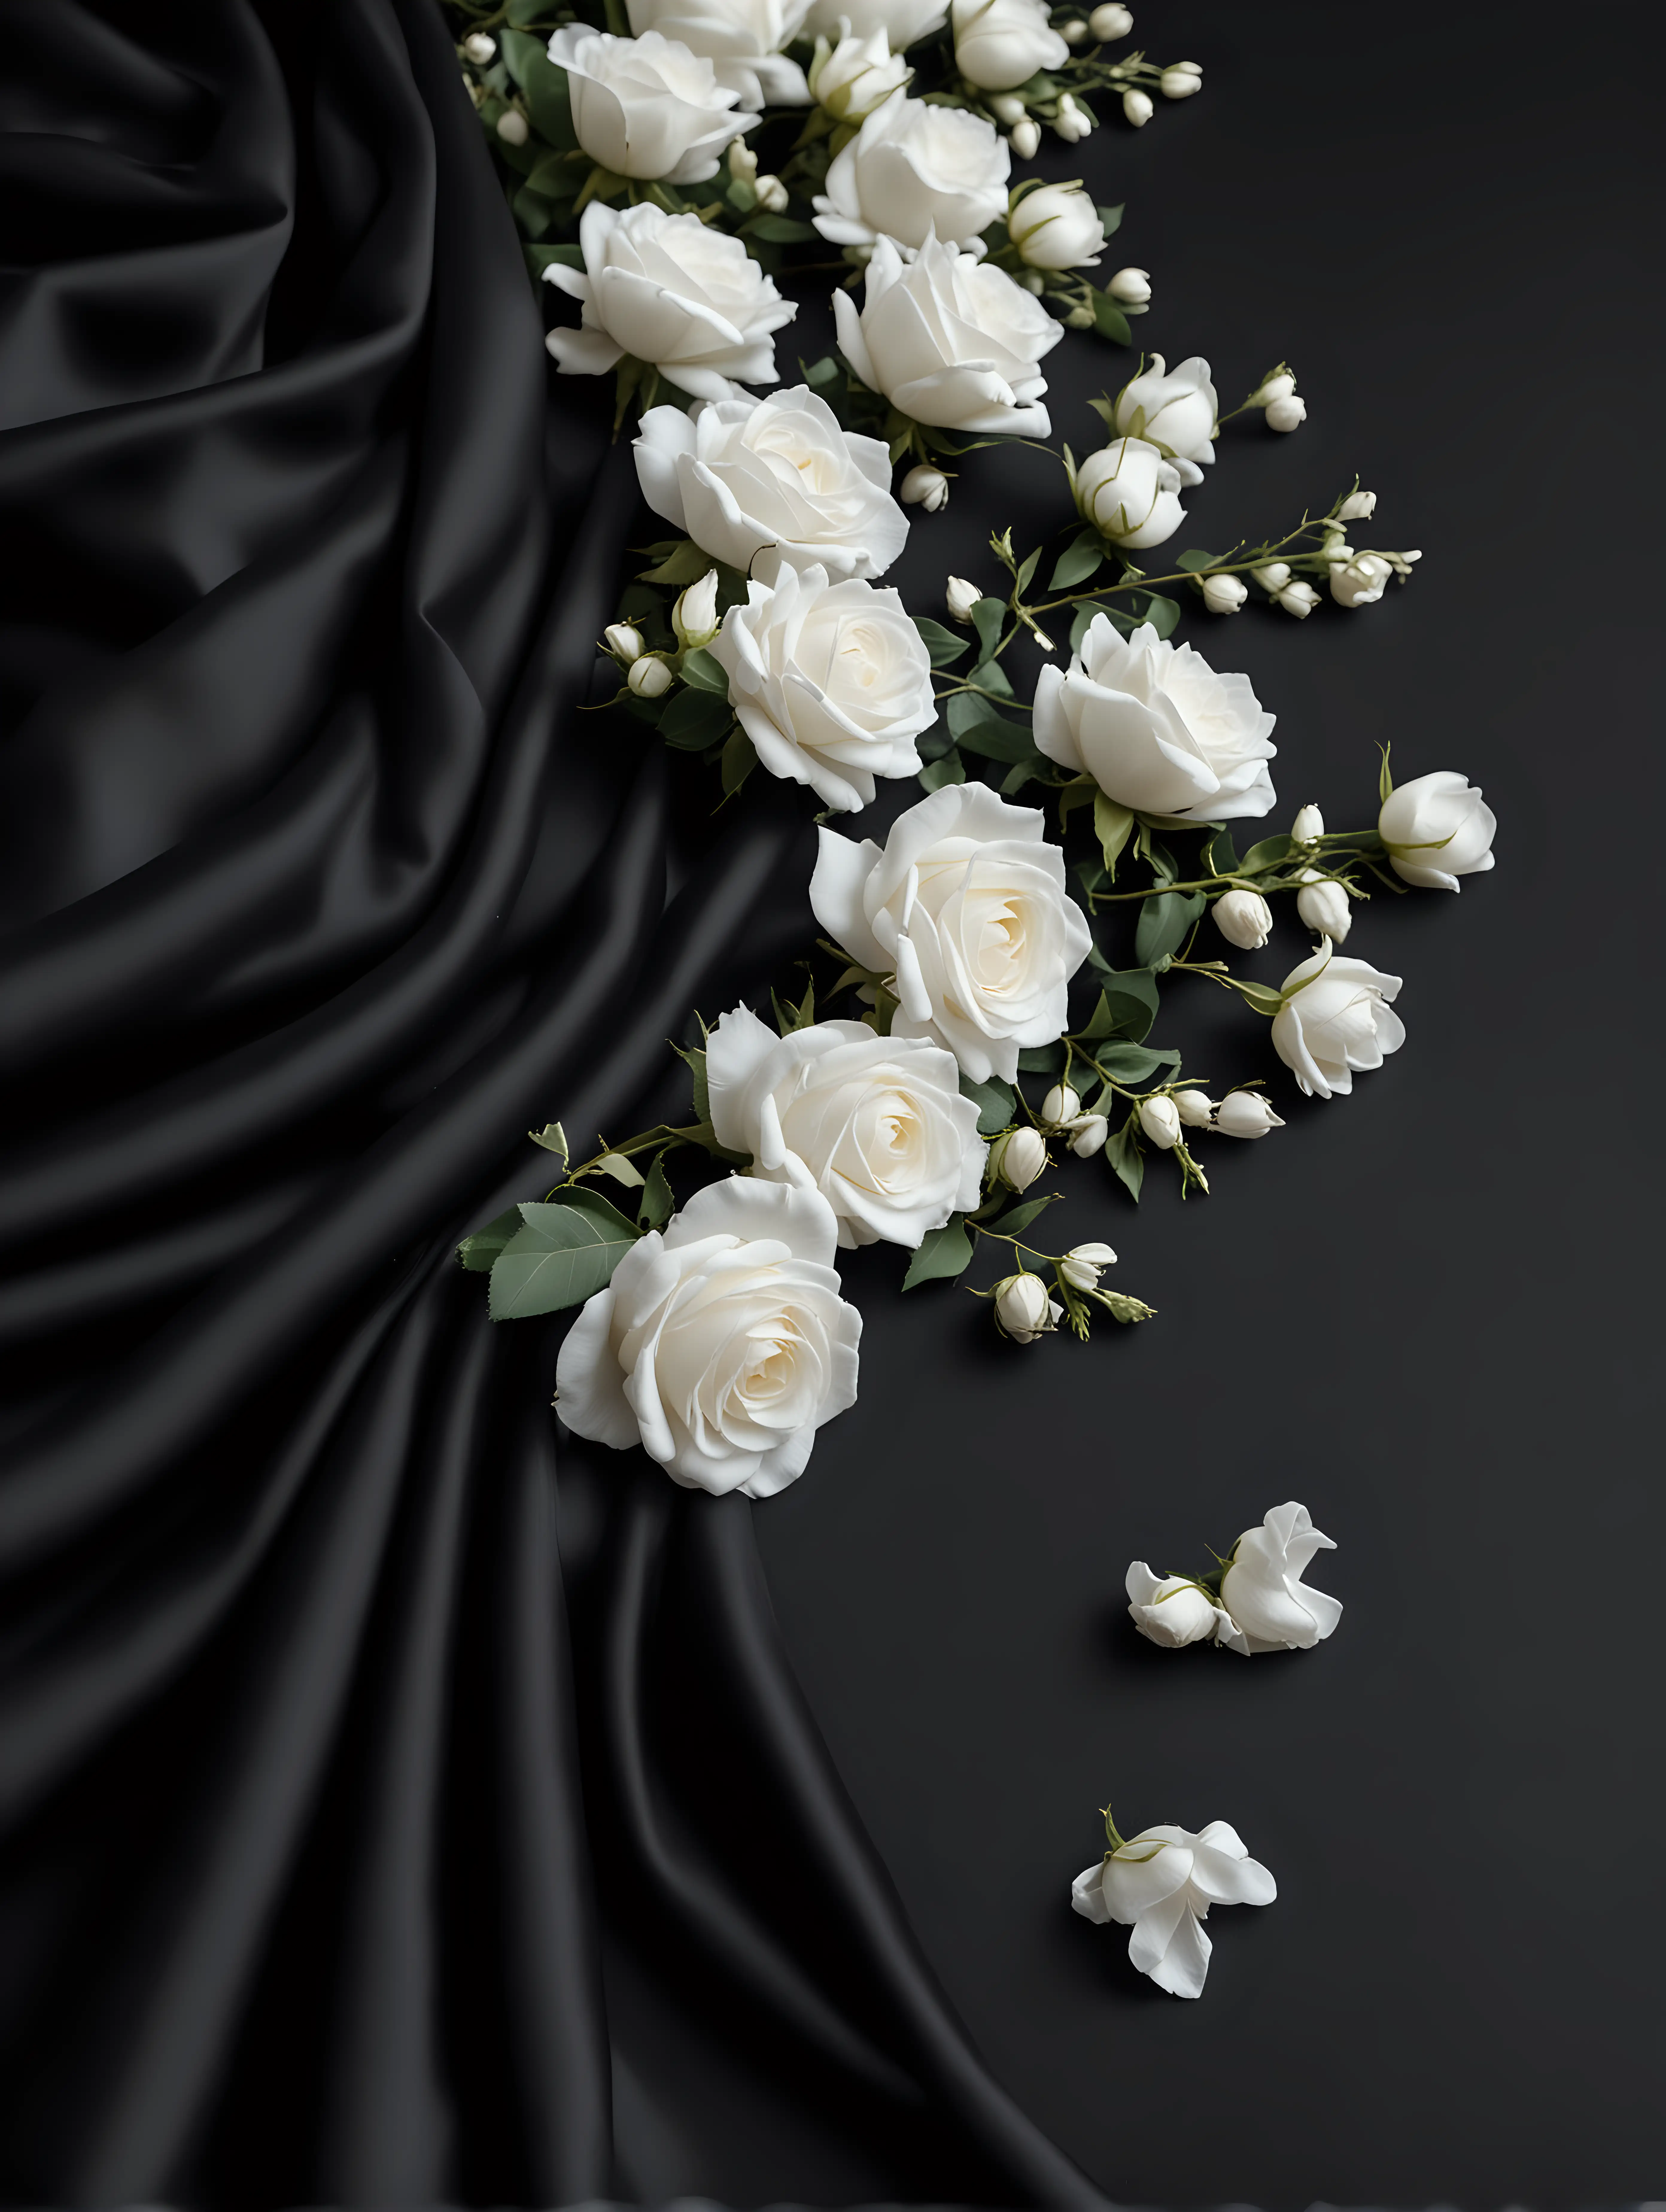 black draped fabric on the left side, on the fabric lies some beautiful white tiny roses, large black solid background